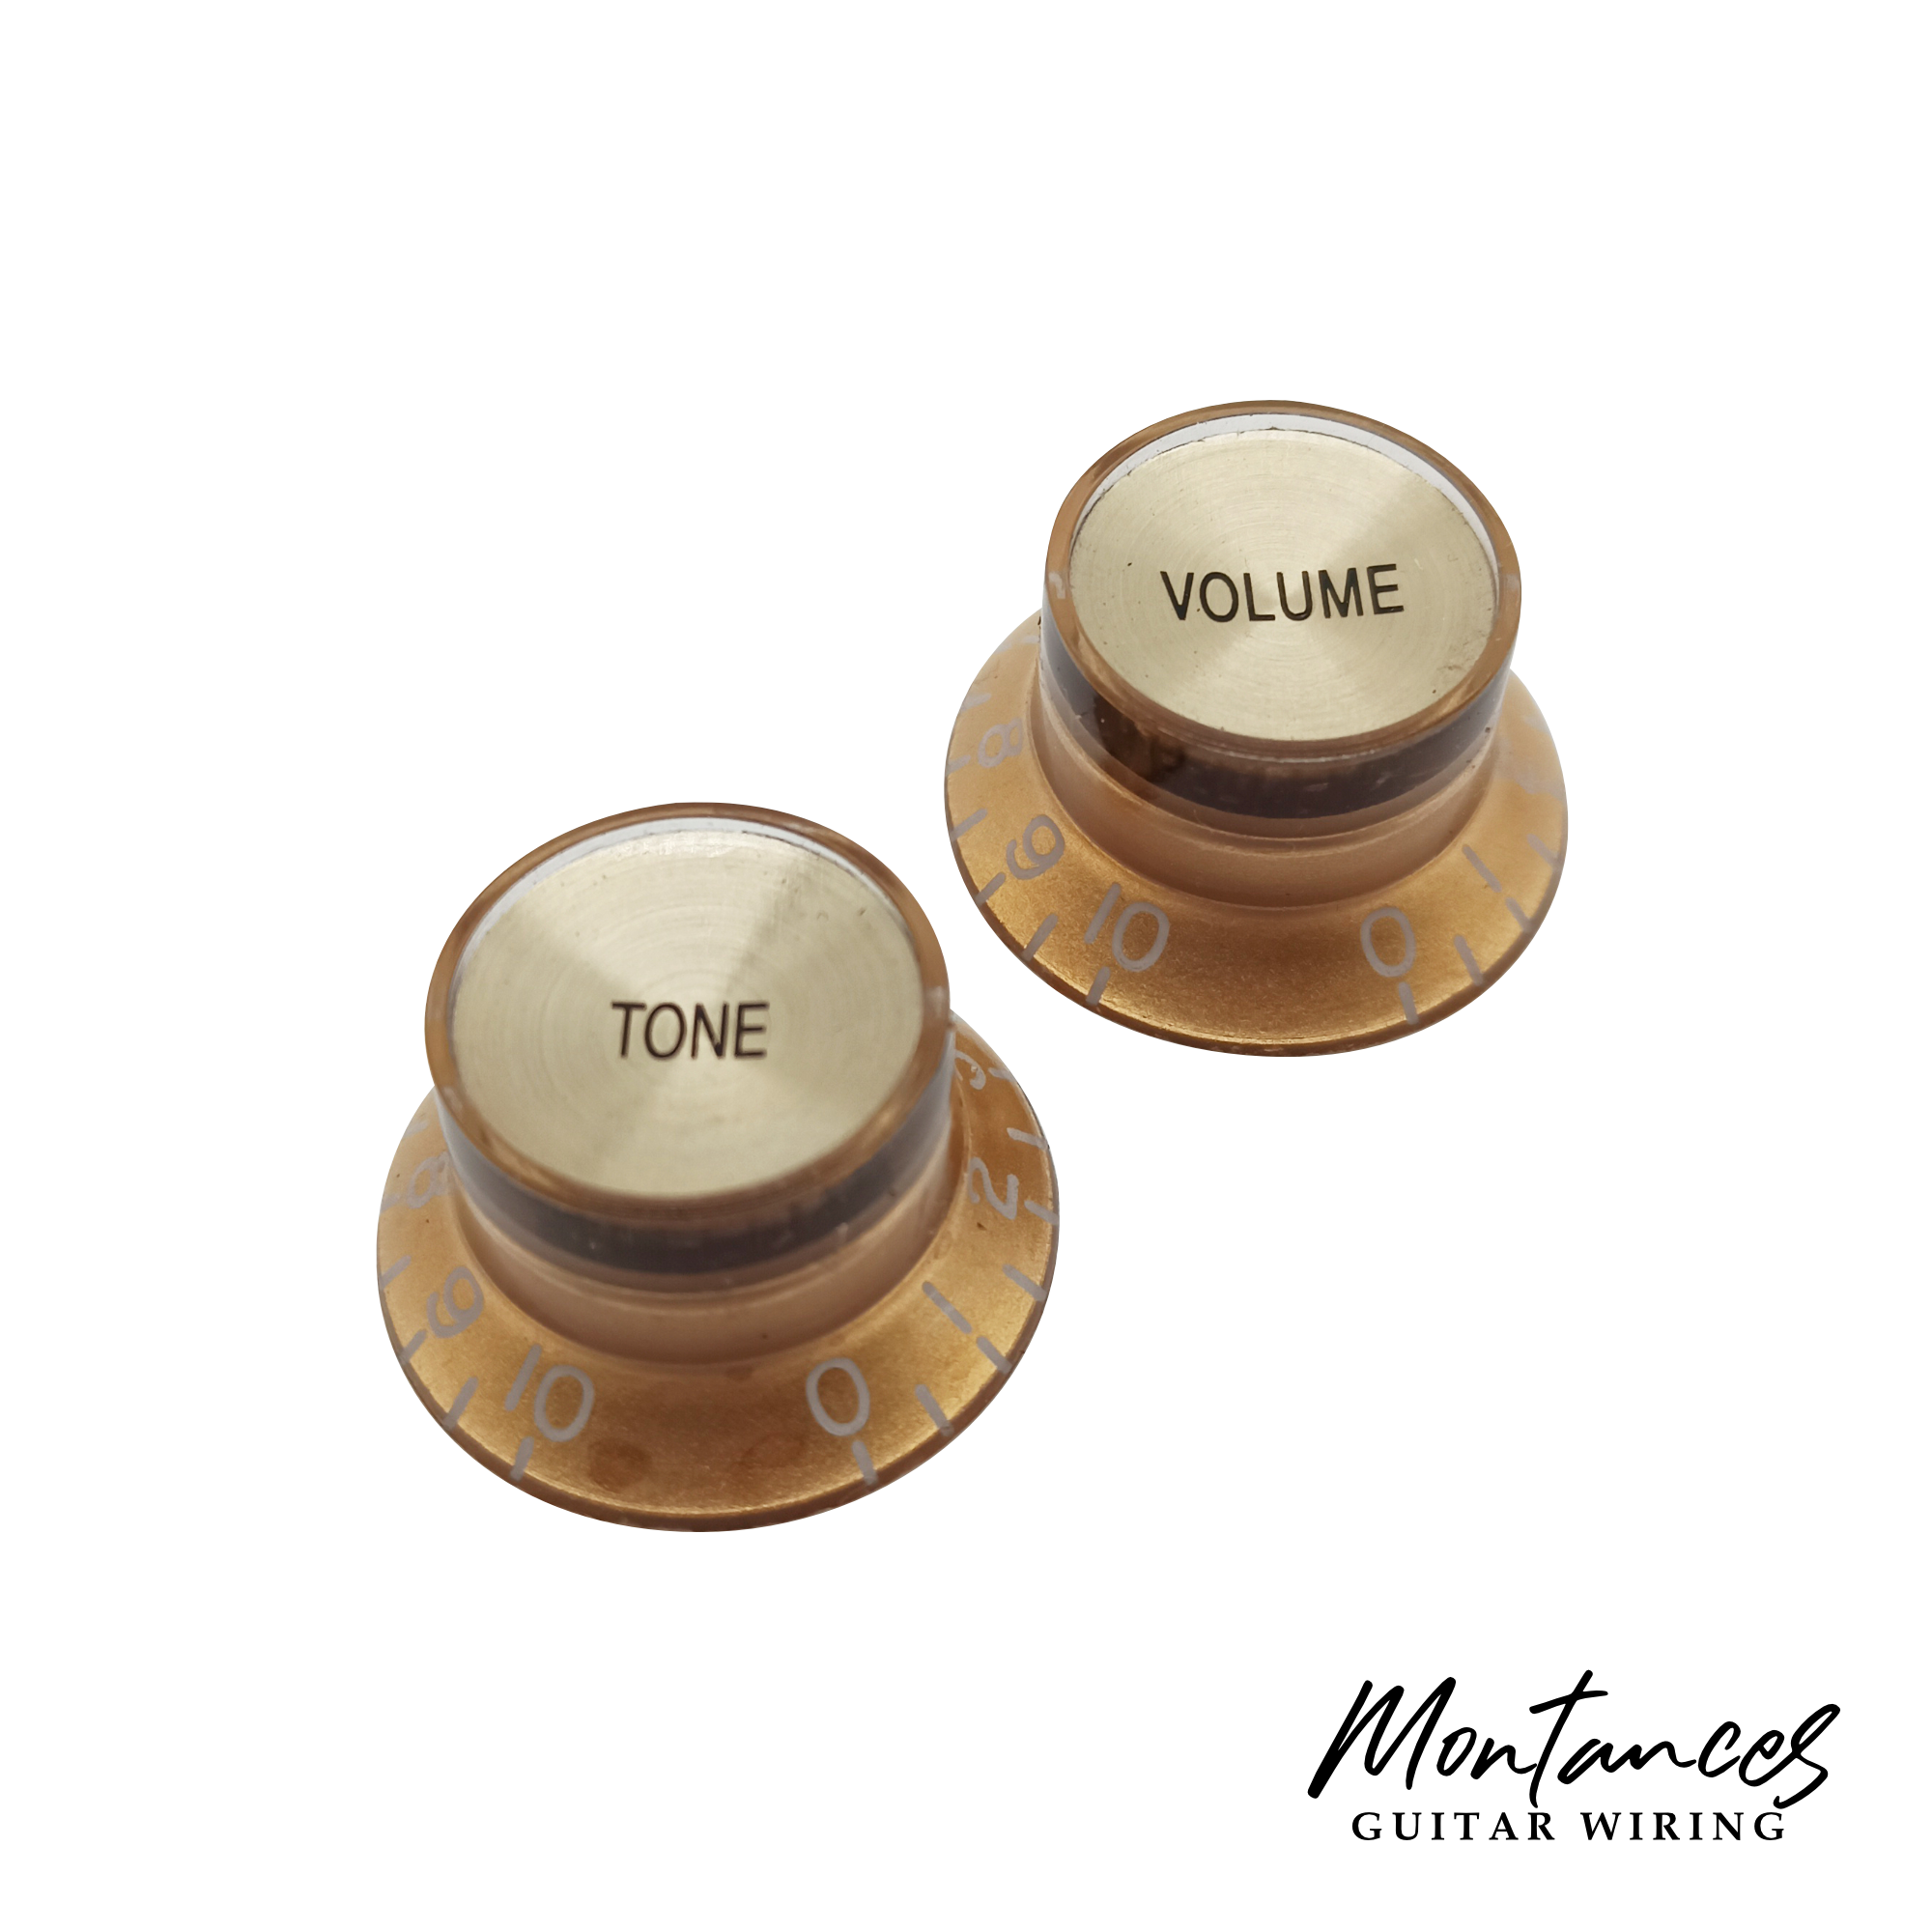 Top Hat Knob, Gold With Gold Cap, Gibson Style Metric, 18 Splines, Sold Per Piece